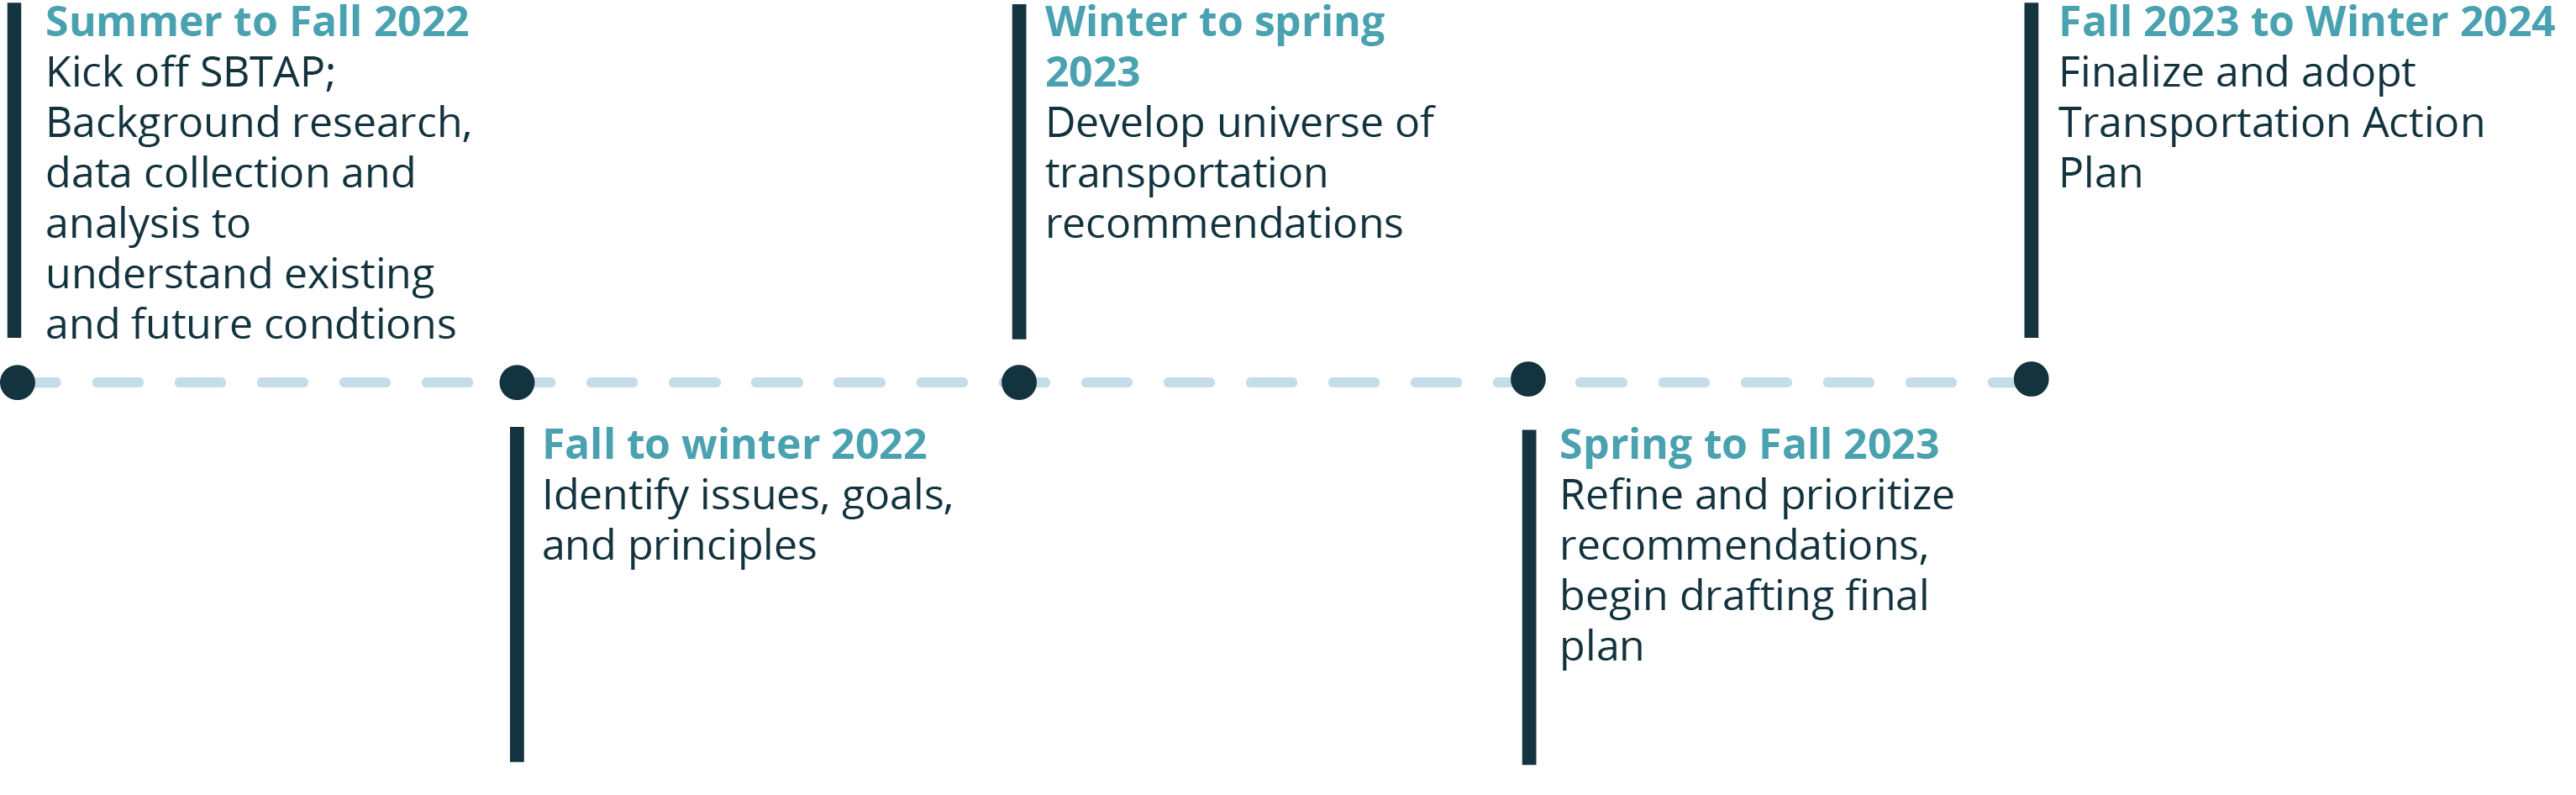 A timeline of the South Boston Transportation Action Plan Schedule and Milestones from Summer 2022 to Summer 2023